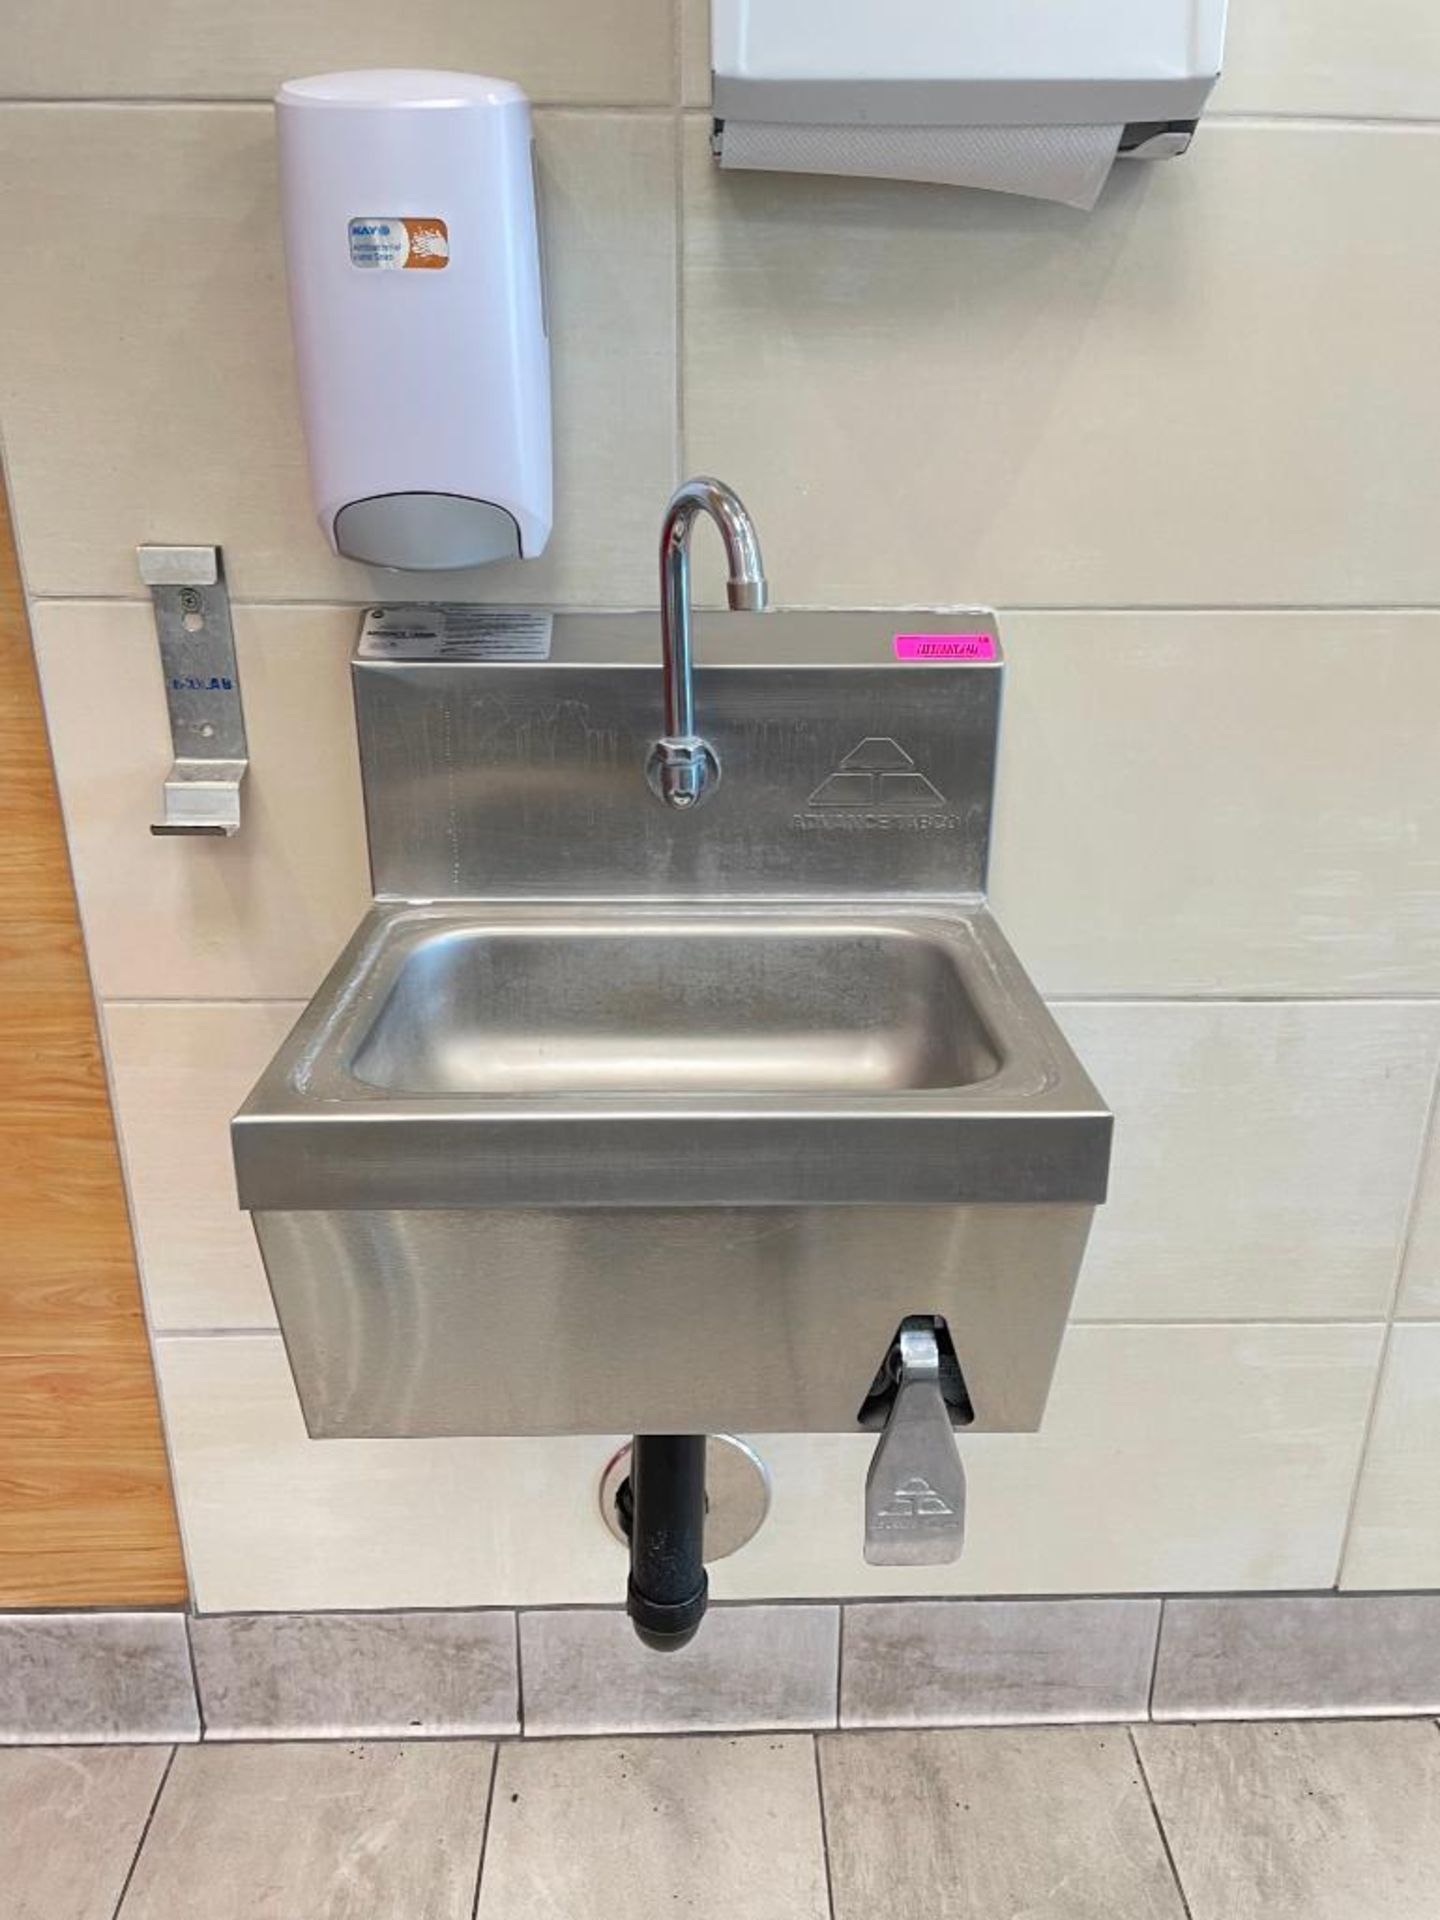 DESCRIPTION: 17" X 15" STAINLESS WALL-MOUNTED SINK W/ SOAP & PAPER TOWEL DISPENSERS SIZE: 17" X 15" - Image 4 of 8